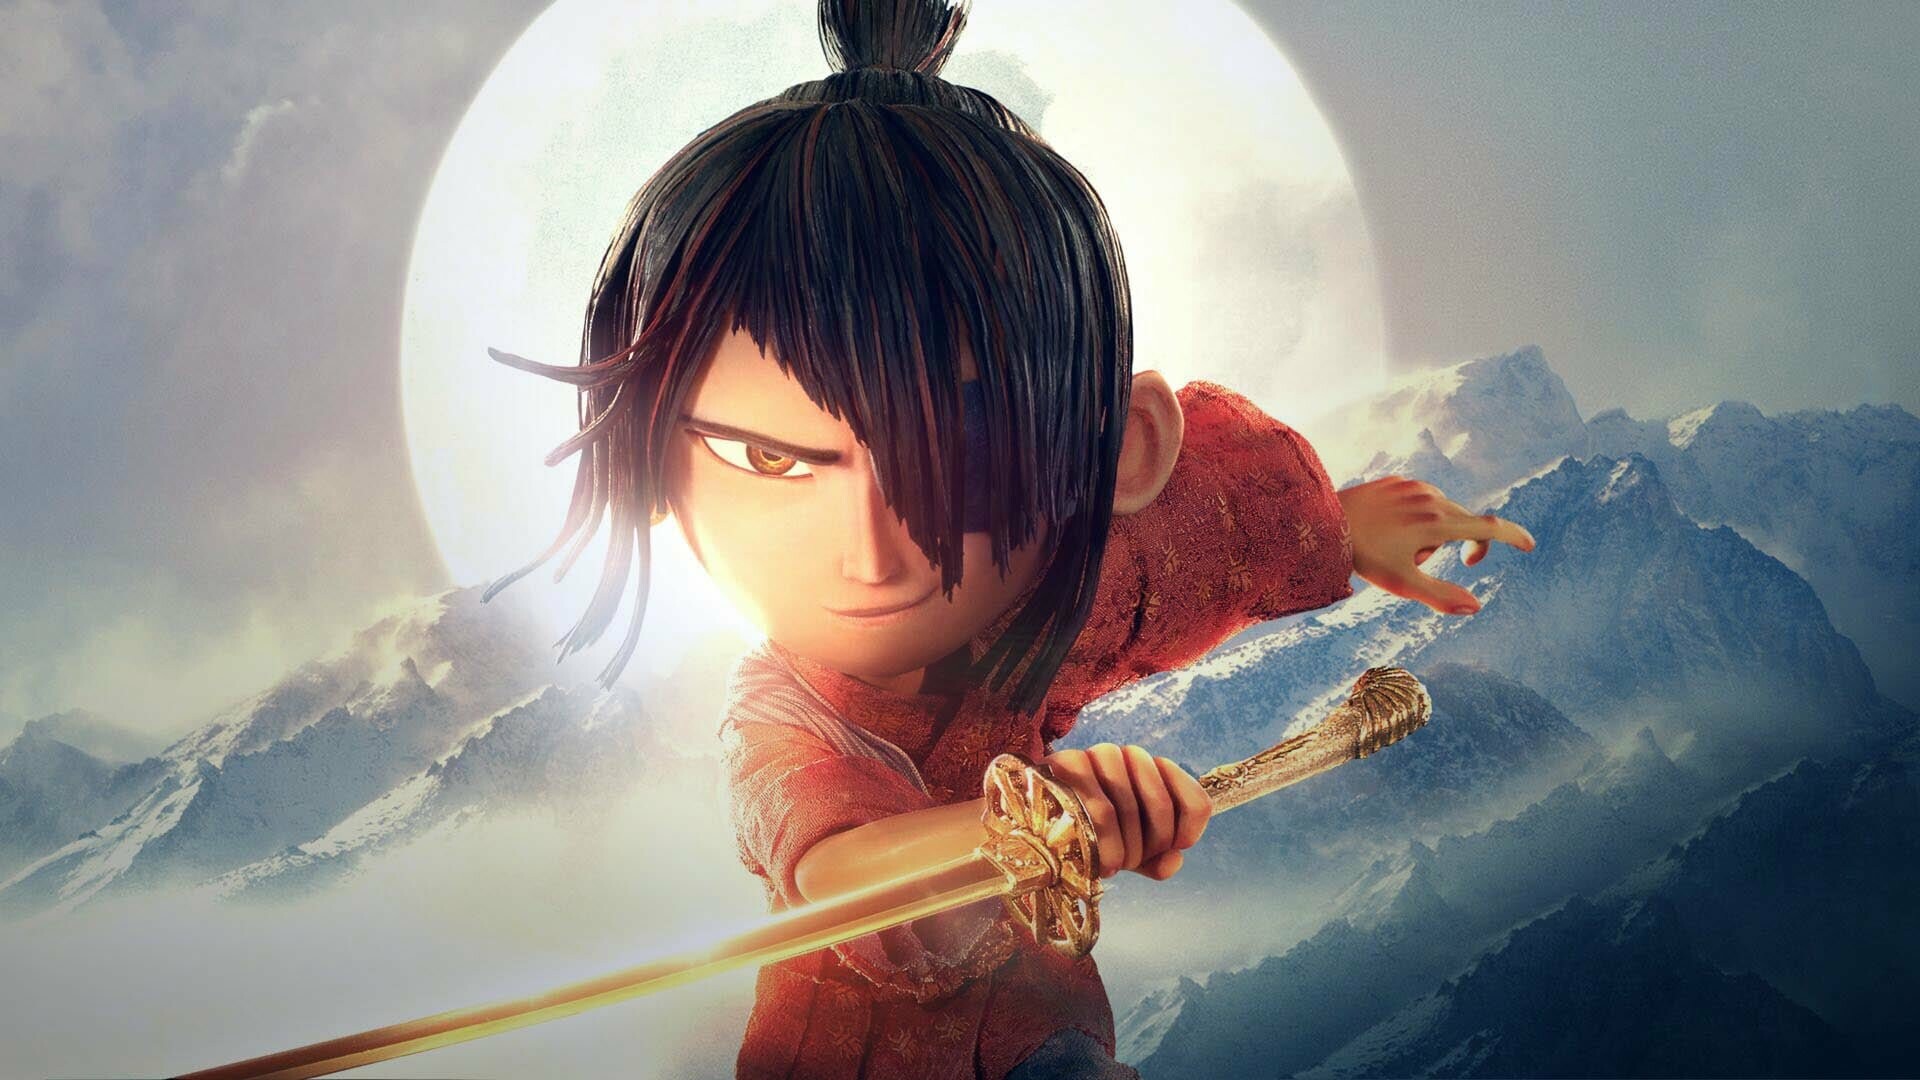 Kubo and the Two Strings: The stop-motion animation, Inspired by Japanese media. 1920x1080 Full HD Wallpaper.